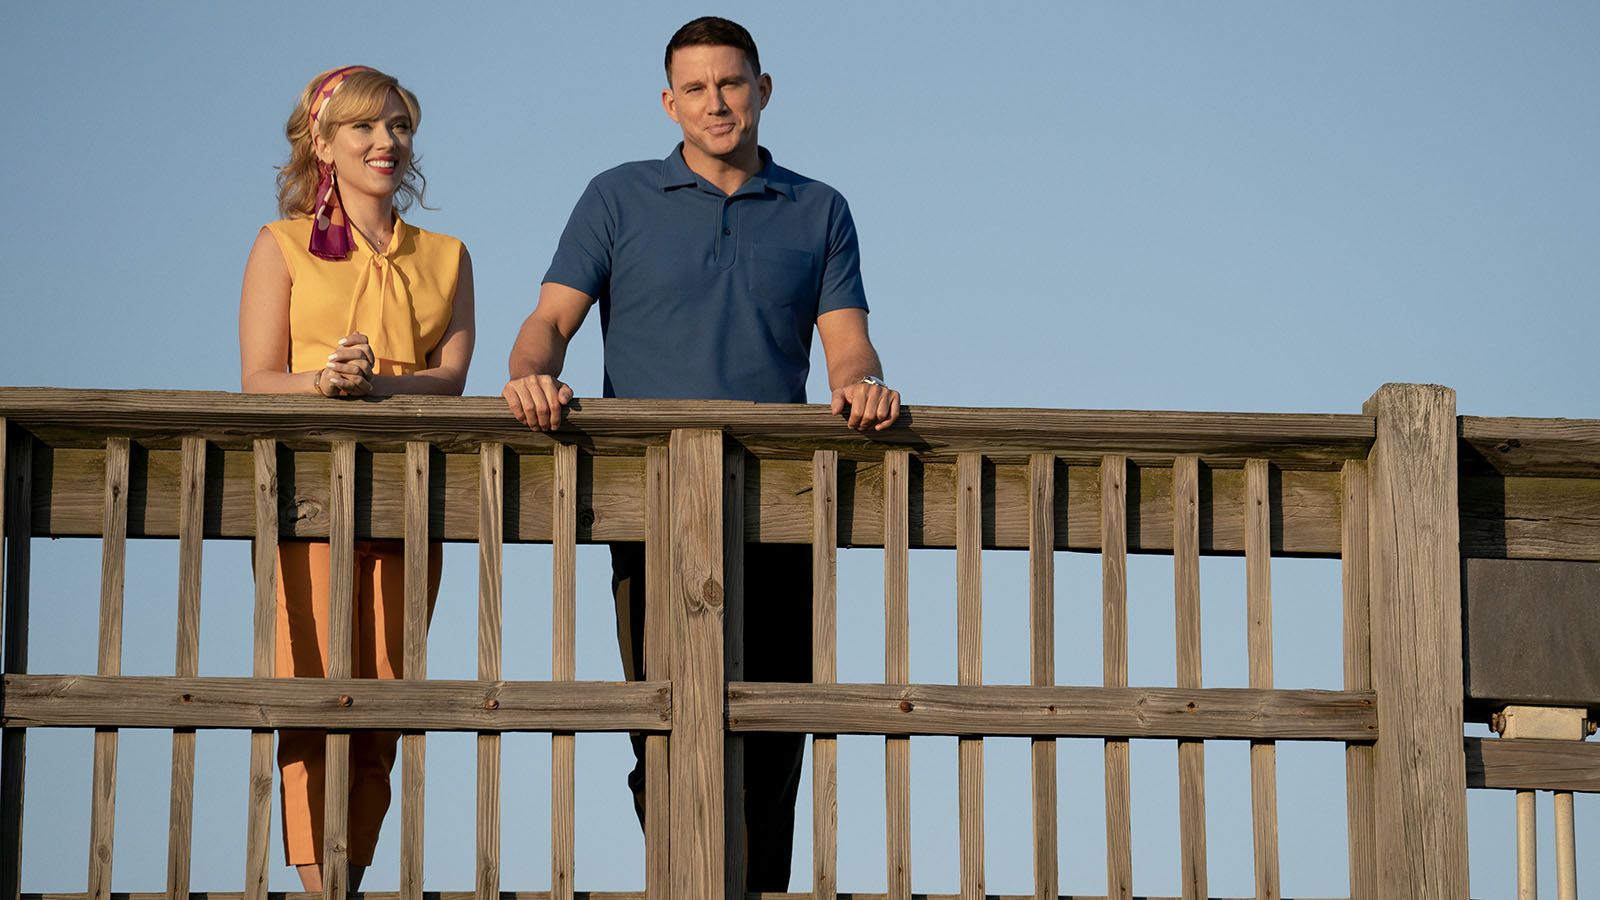 Scarlett Johansson and Channing Tatum lack chemistry in the new film Fly Me to the Moon.